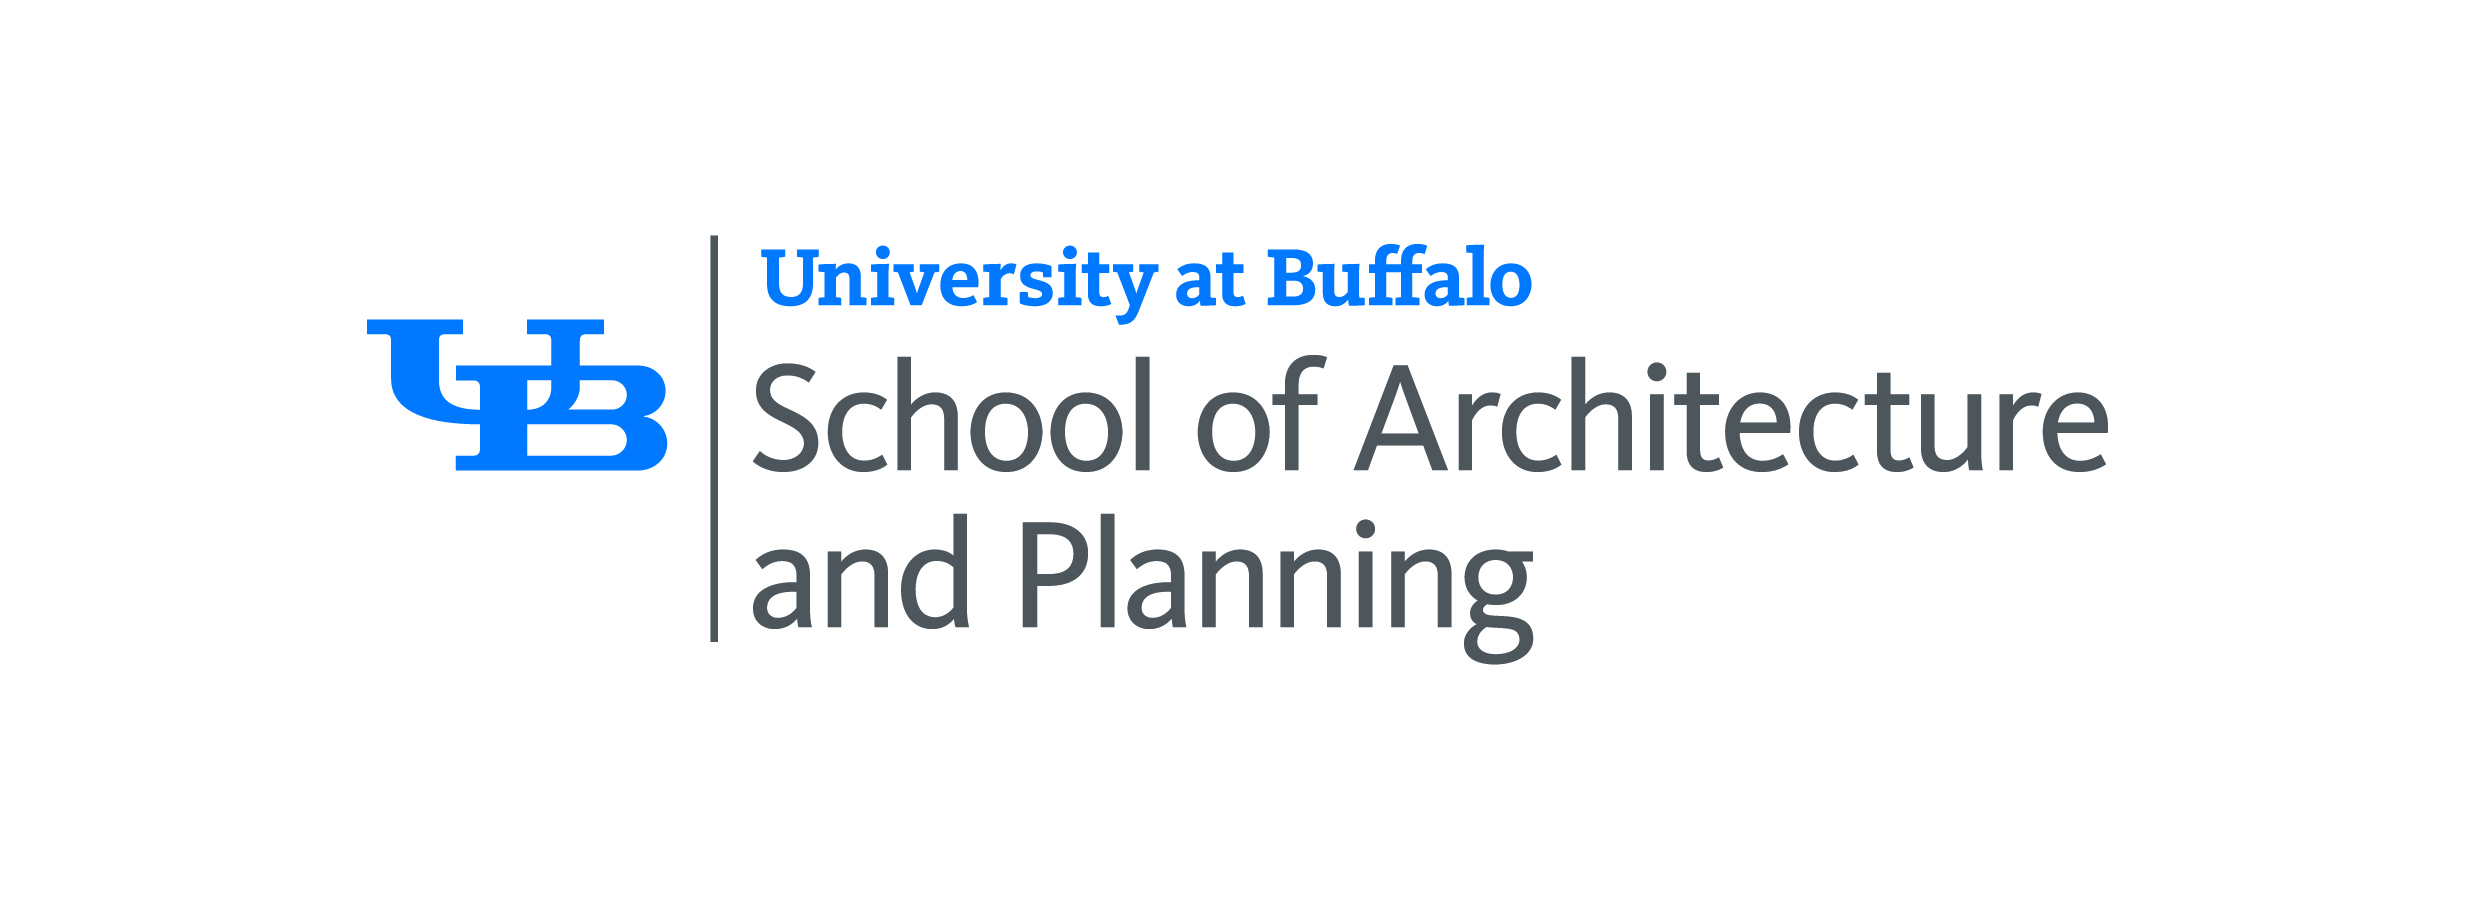 University at Buffalo School of Architecture and Planning